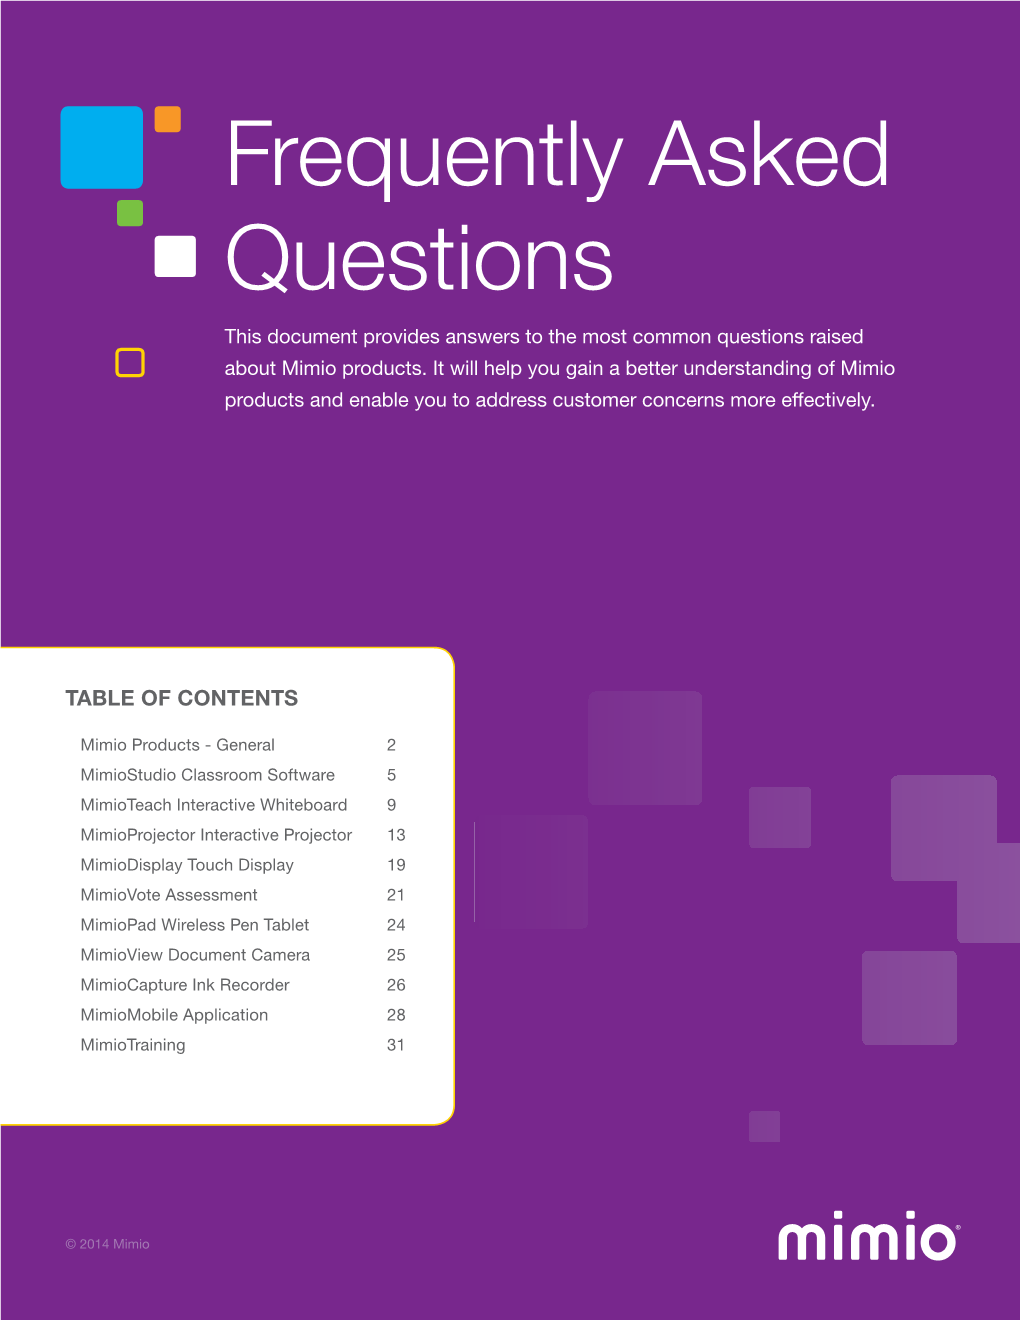 Frequently Asked Questions This Document Provides Answers to the Most Common Questions Raised About Mimio Products